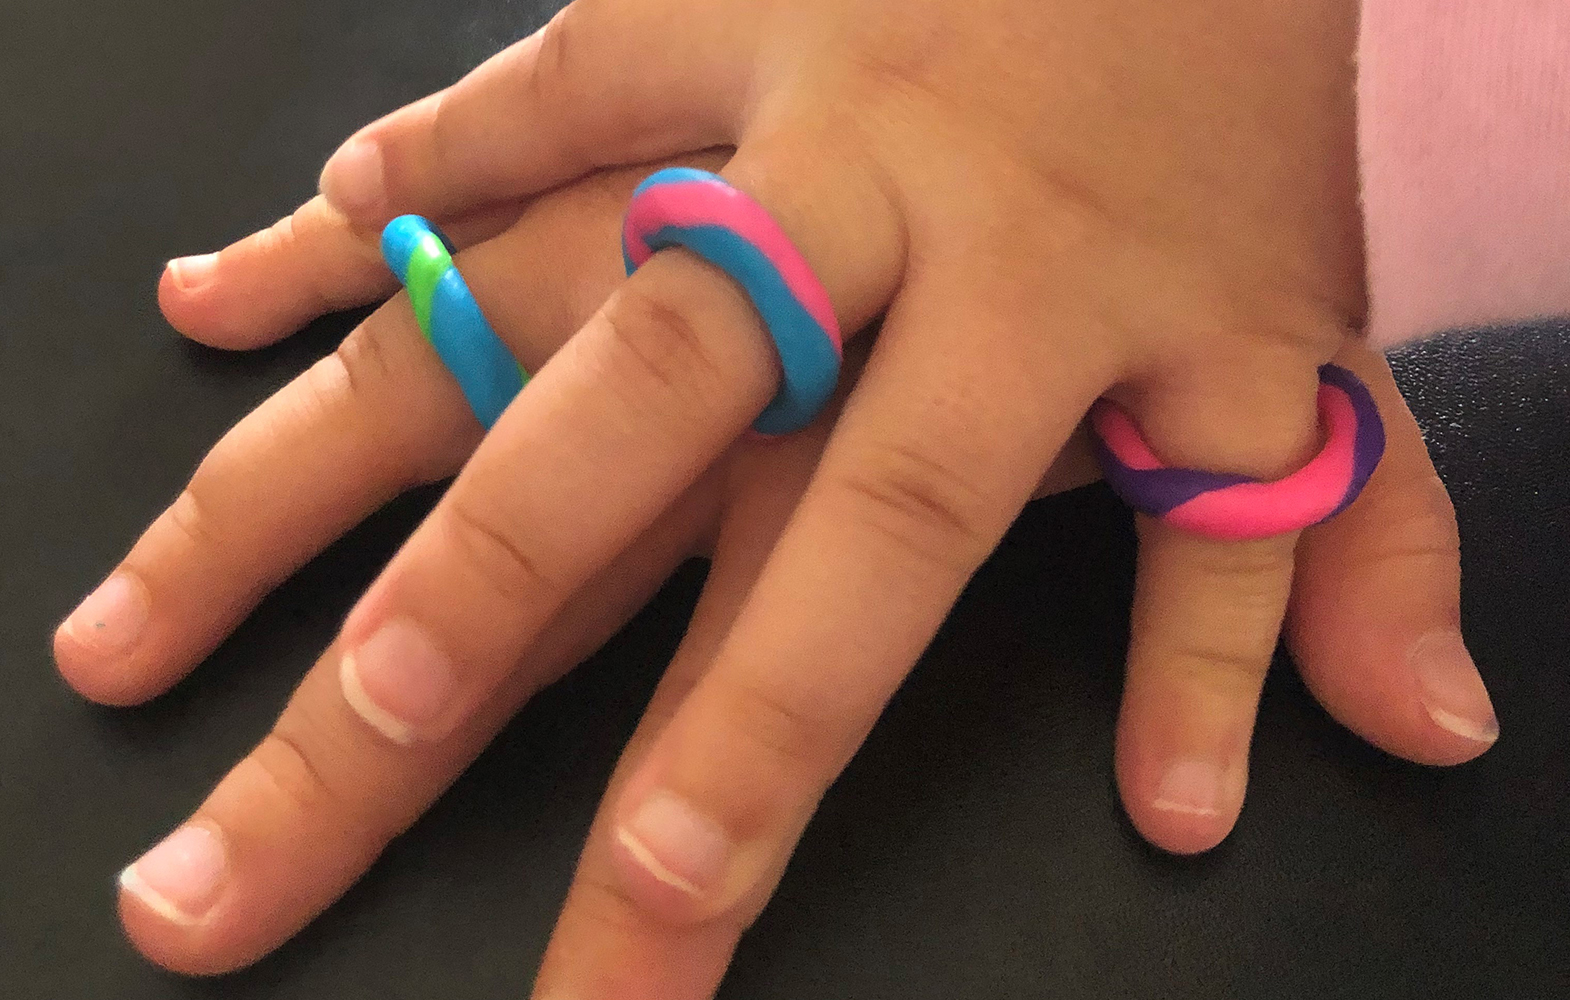 A child's hand ontop of a larger hand, both hands are wearing colourful rings